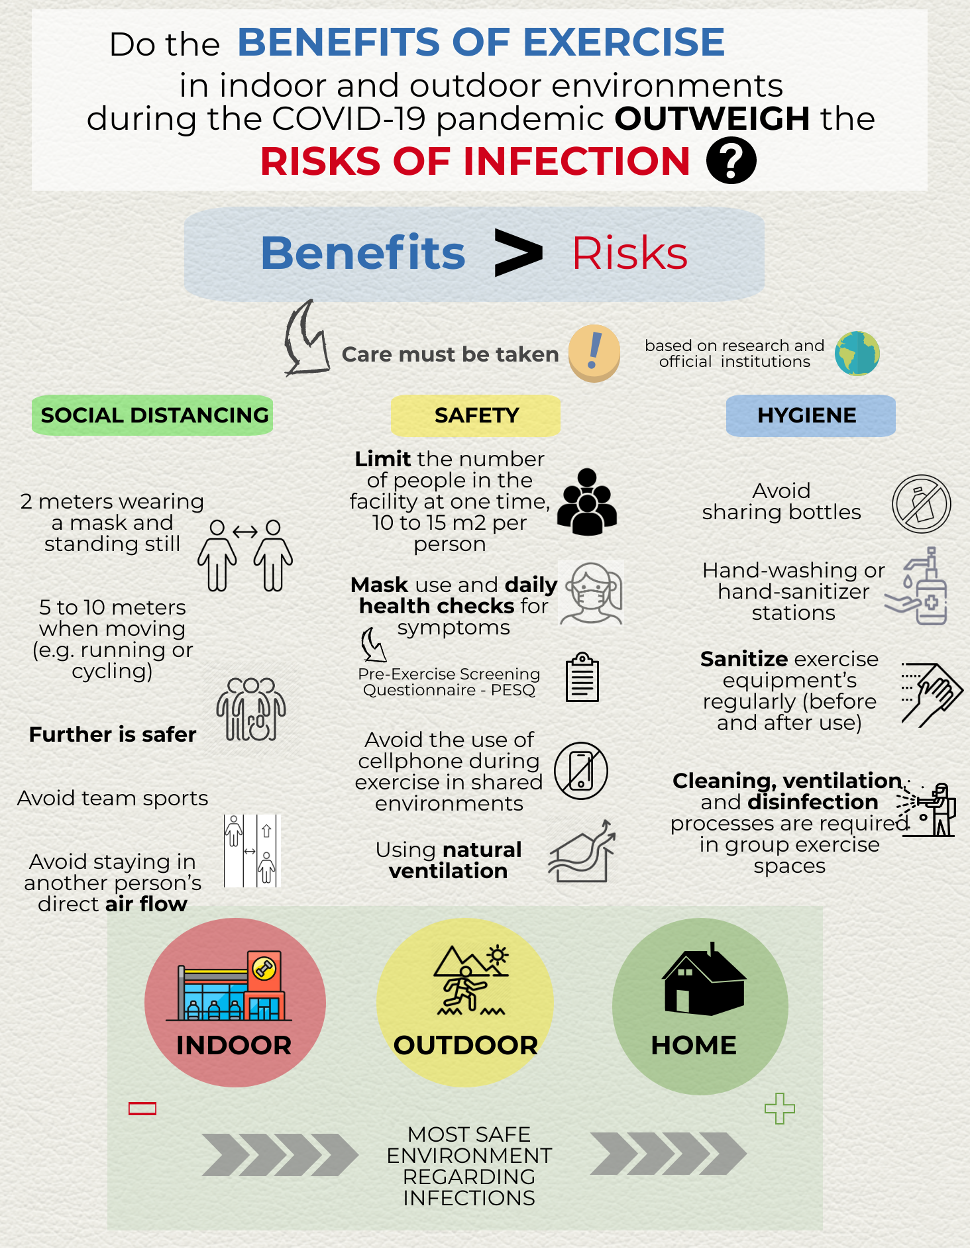 Am I better exercising indoors or outdoors during the pandemic?  #Infographic - BJSM blog - social media's leading SEM voice